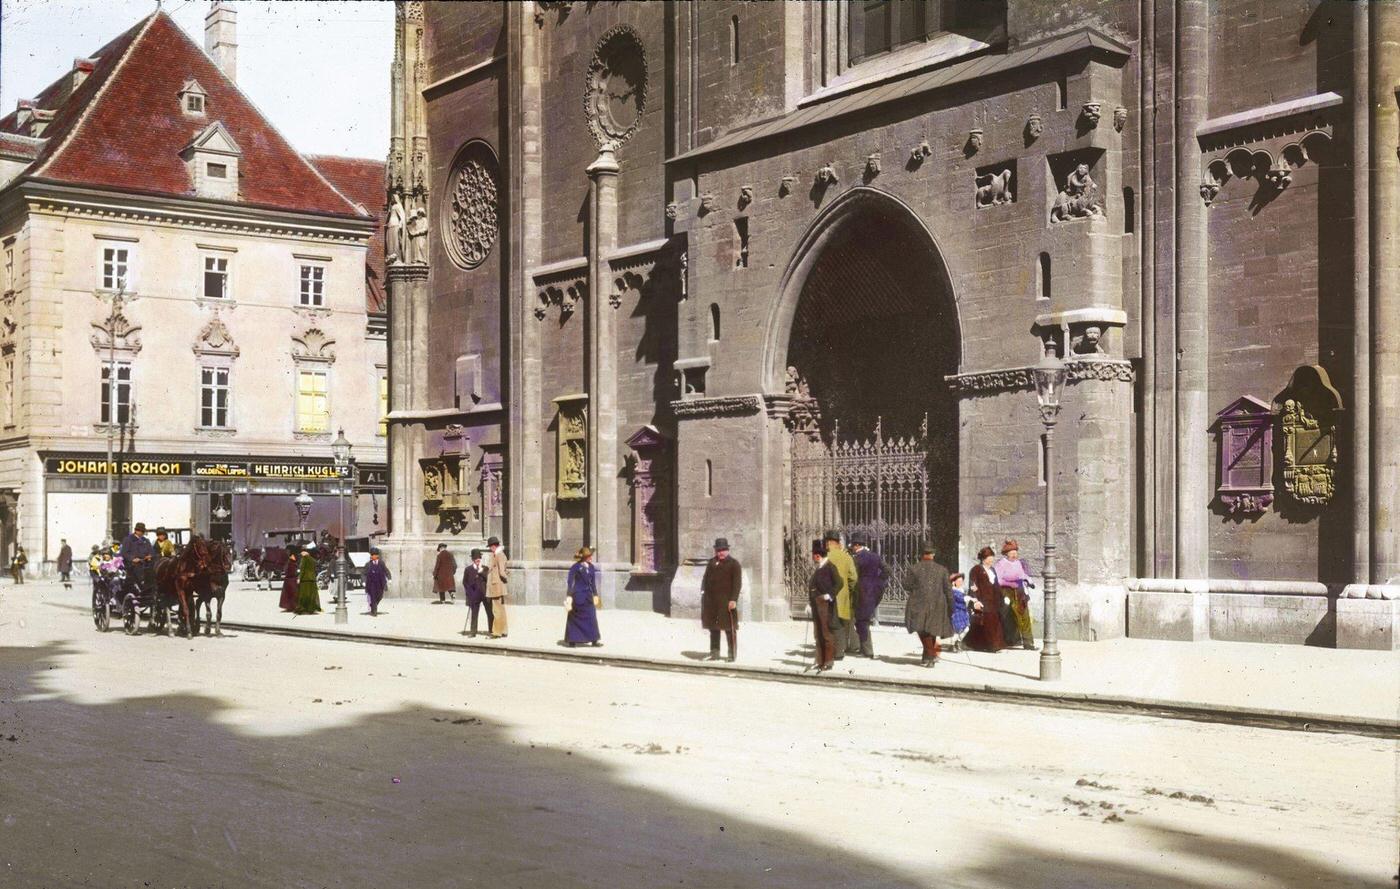 The Heidentor of the St. Stephan's Cathedral and the Archiepiscopal Palace in Vienna's first district, 1900.